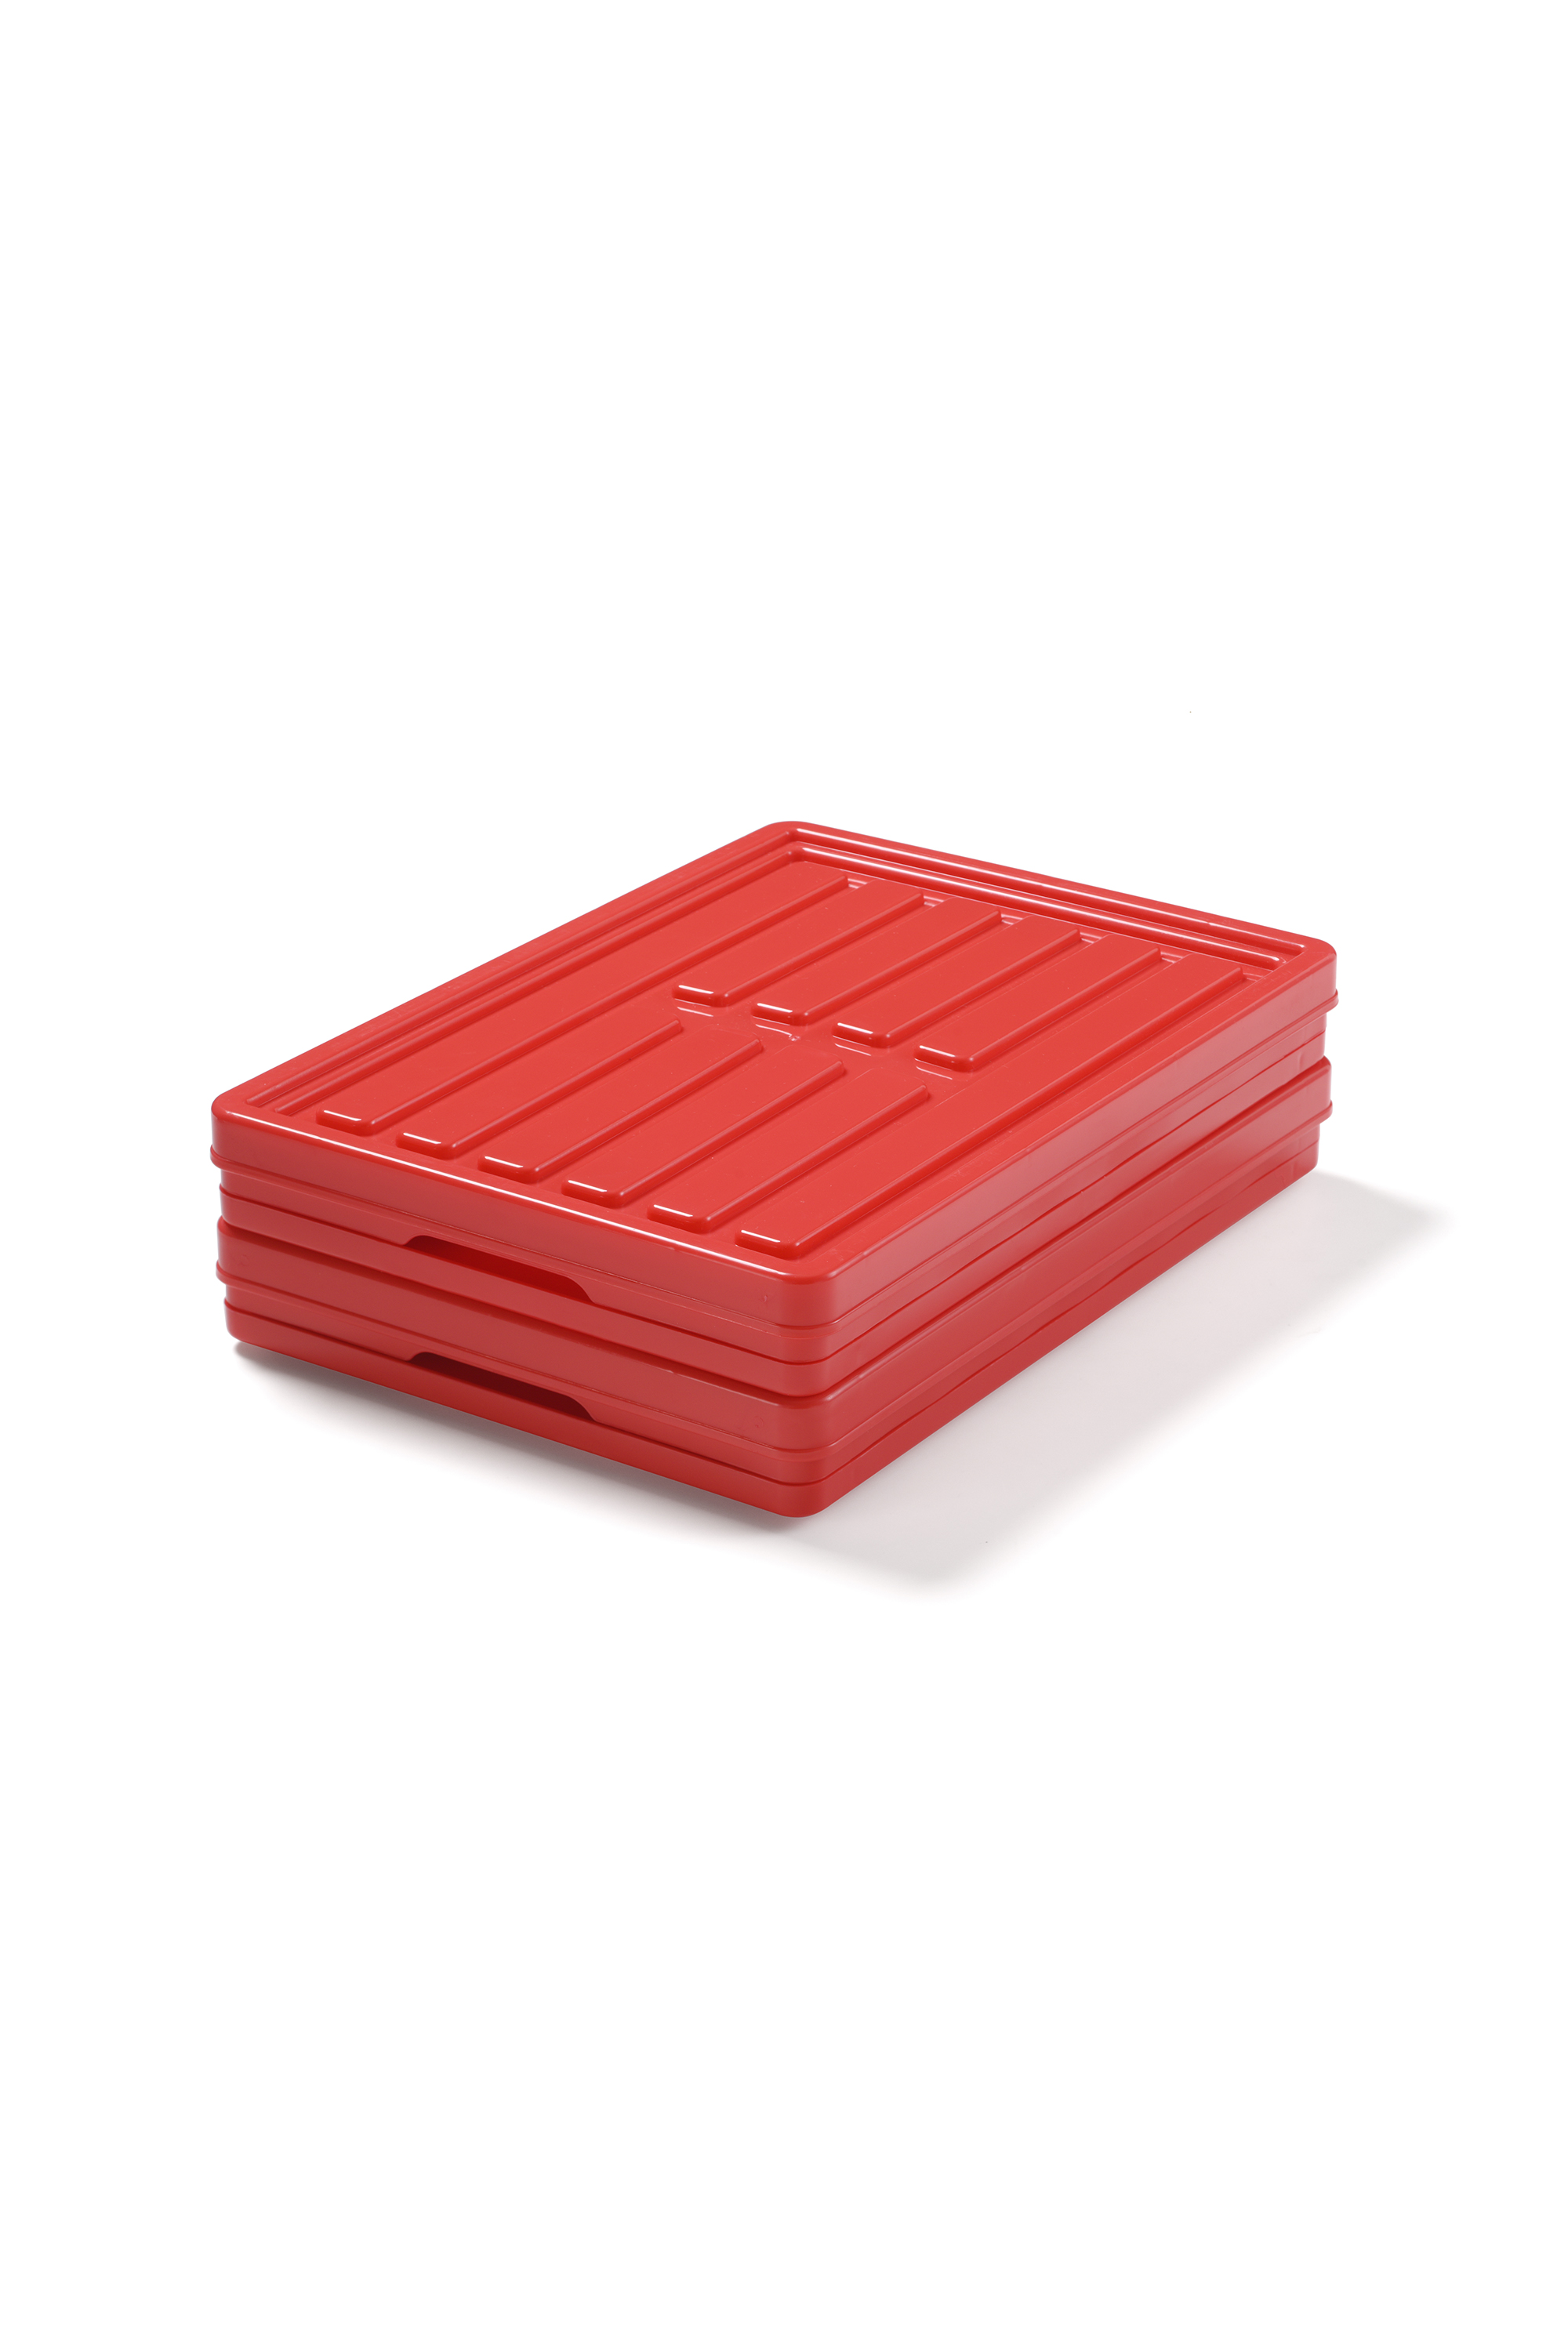 Diesel - CONTAINER BOX SET (RED), レッド - Image 2